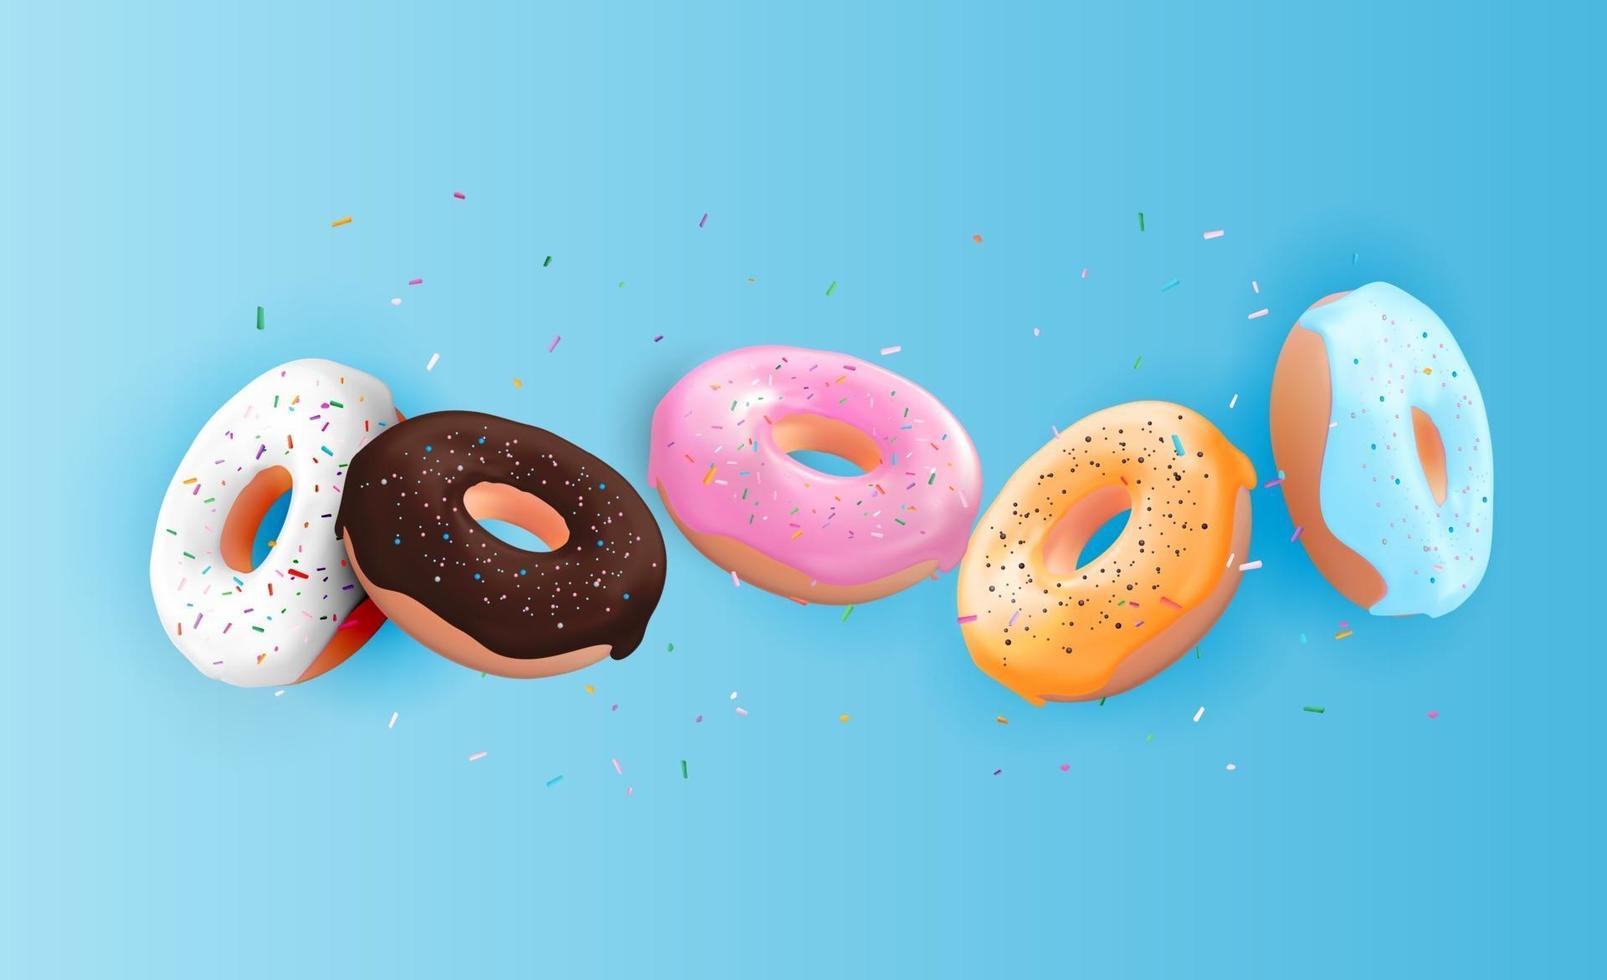 Realistic 3d sweet tasty donut background. vector